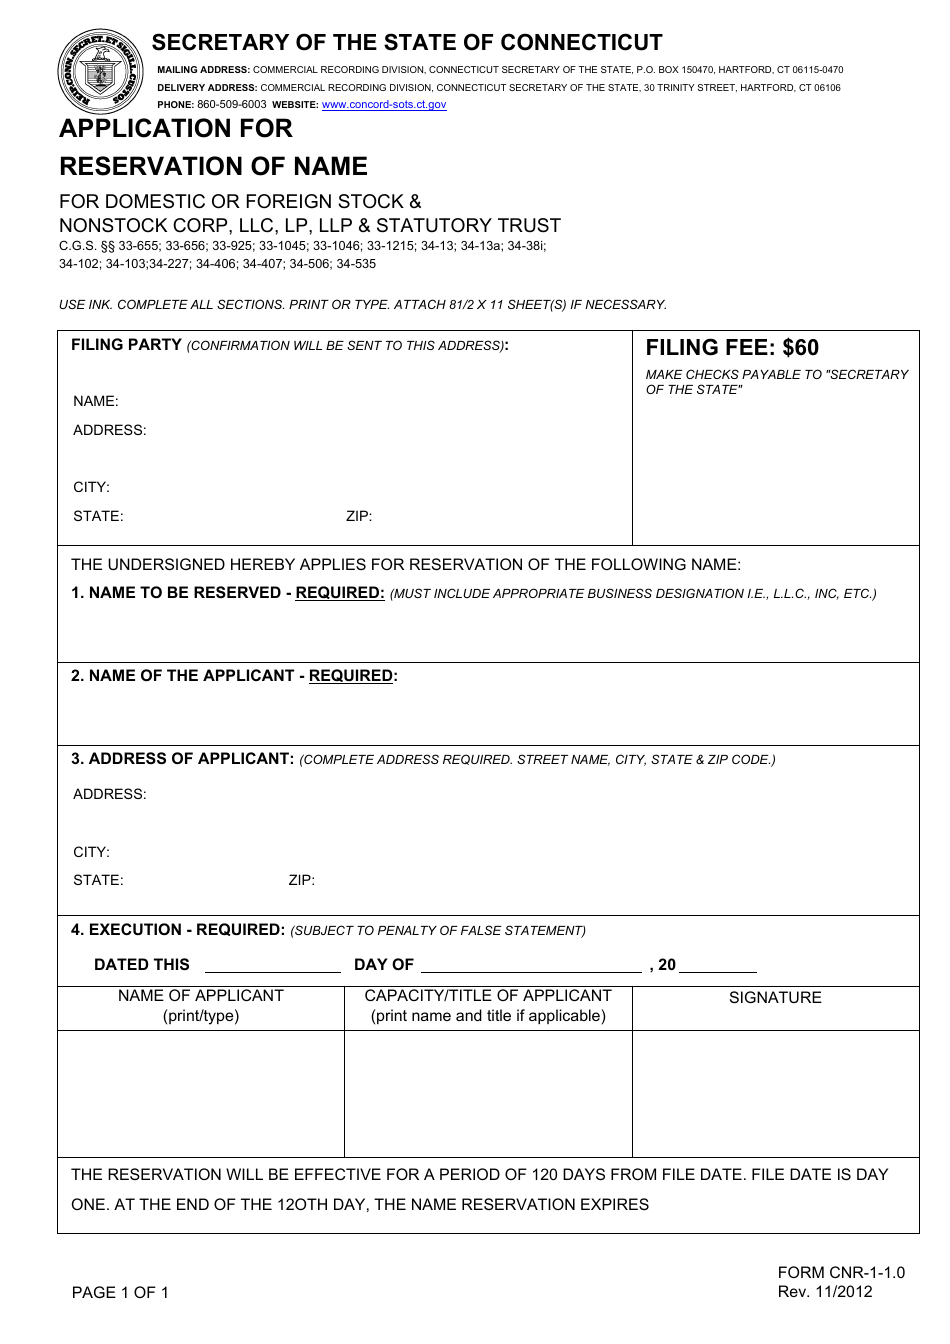 Form CNR-1-1.0 Application for Reservation of Name - Connecticut, Page 1